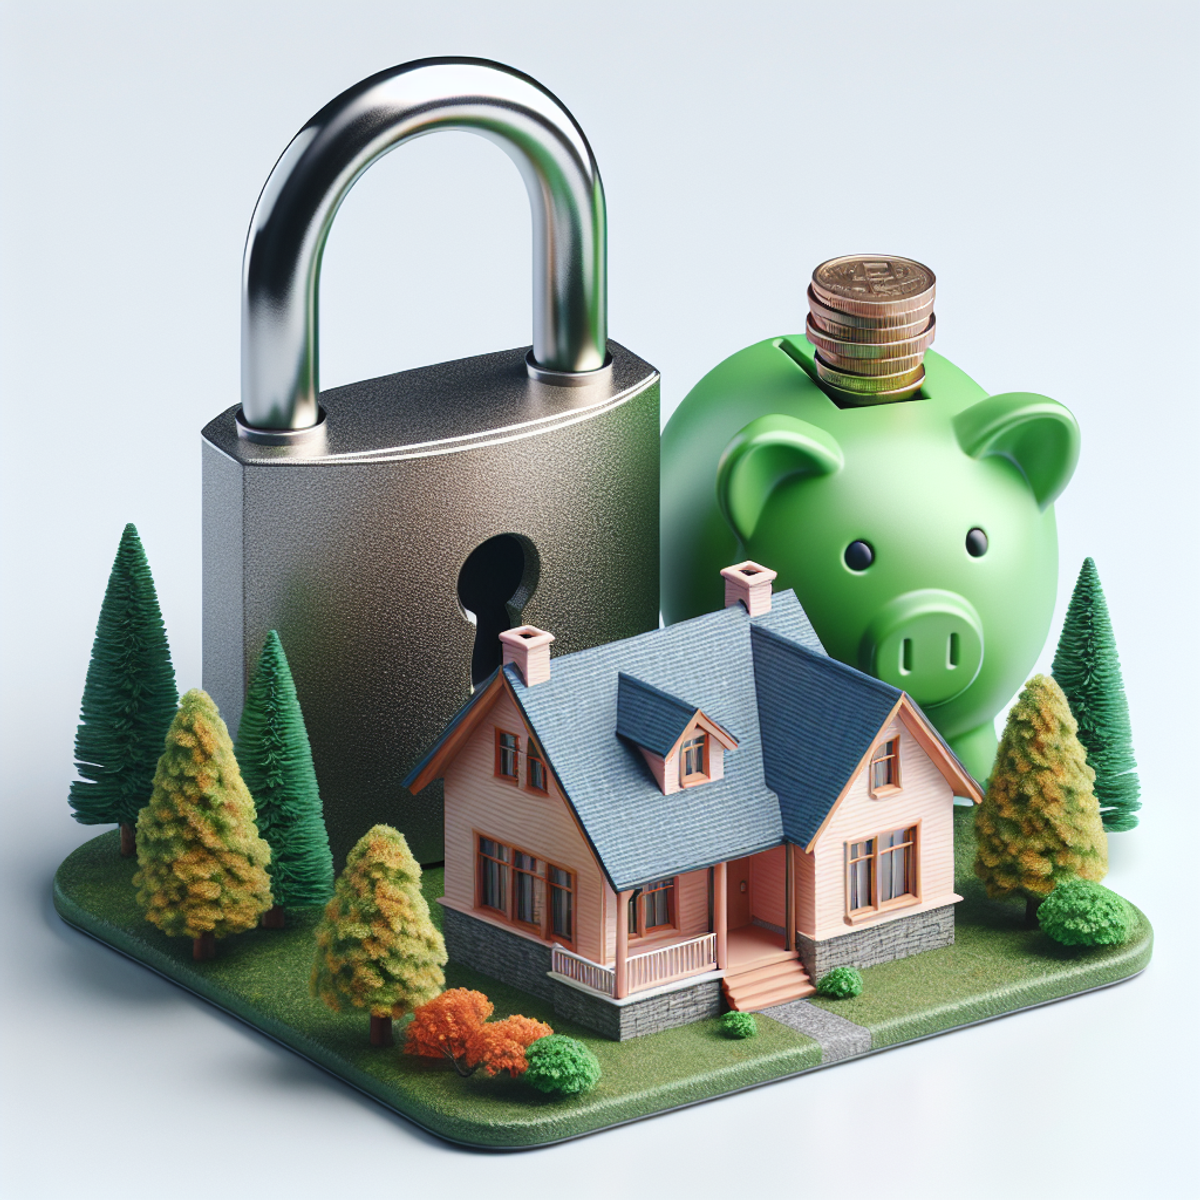 Cozy, sturdy house nestled among lush greenery with a large, untarnished padlock hovering above it, unlocked, and a small, prominent piggy bank nearby, painted green and stuffed with coins.